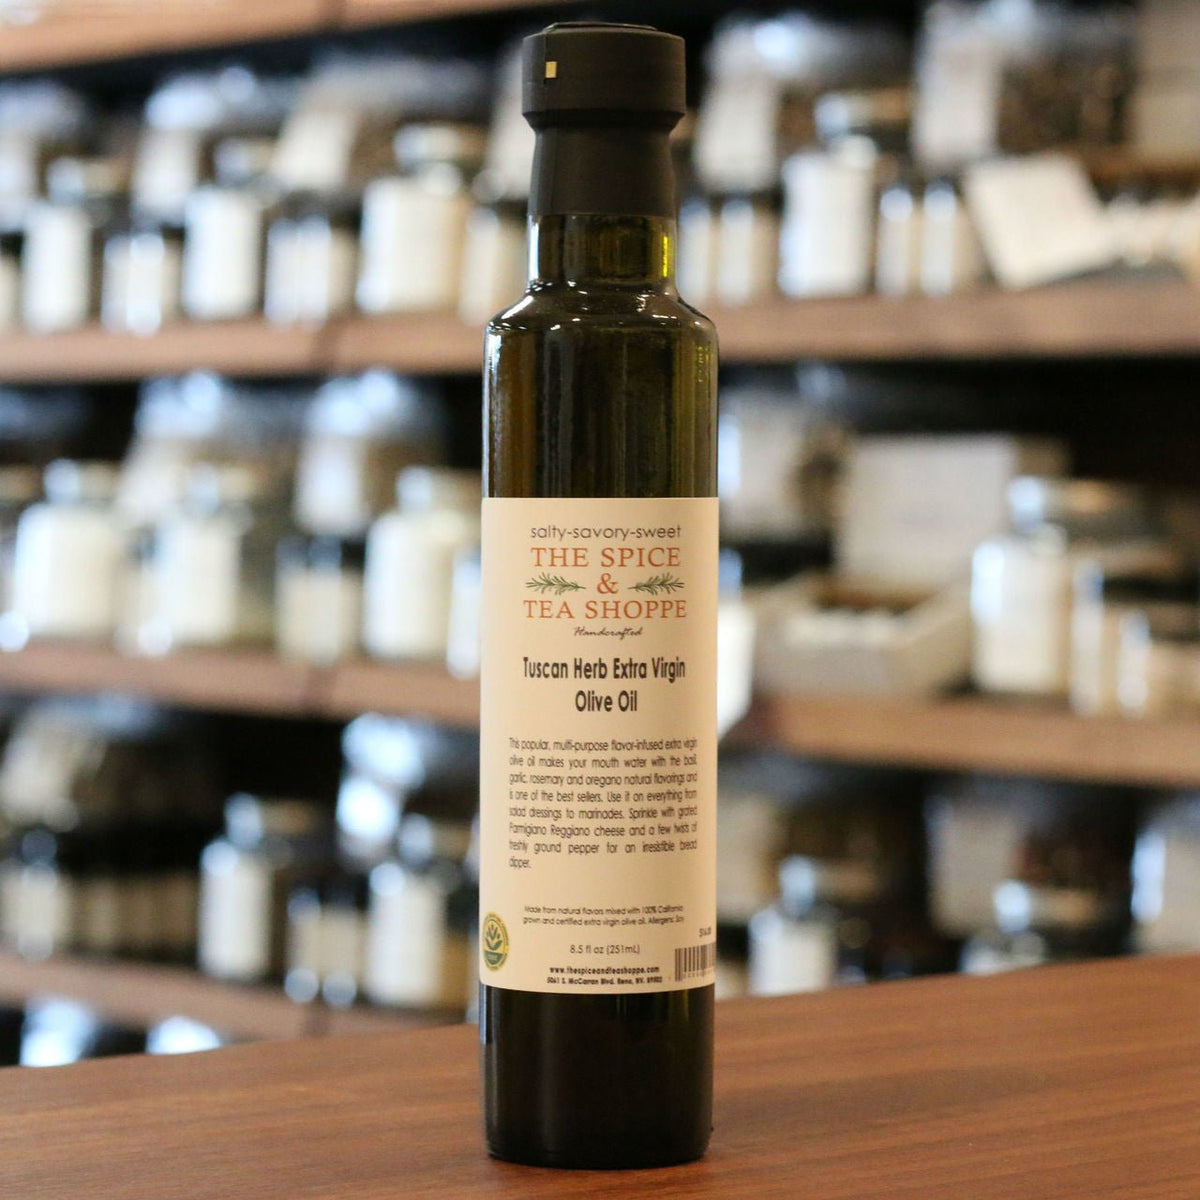 Gourmet Foods - Tuscan Herb Extra Virgin Olive Oil - THE SPICE & TEA SHOPPE